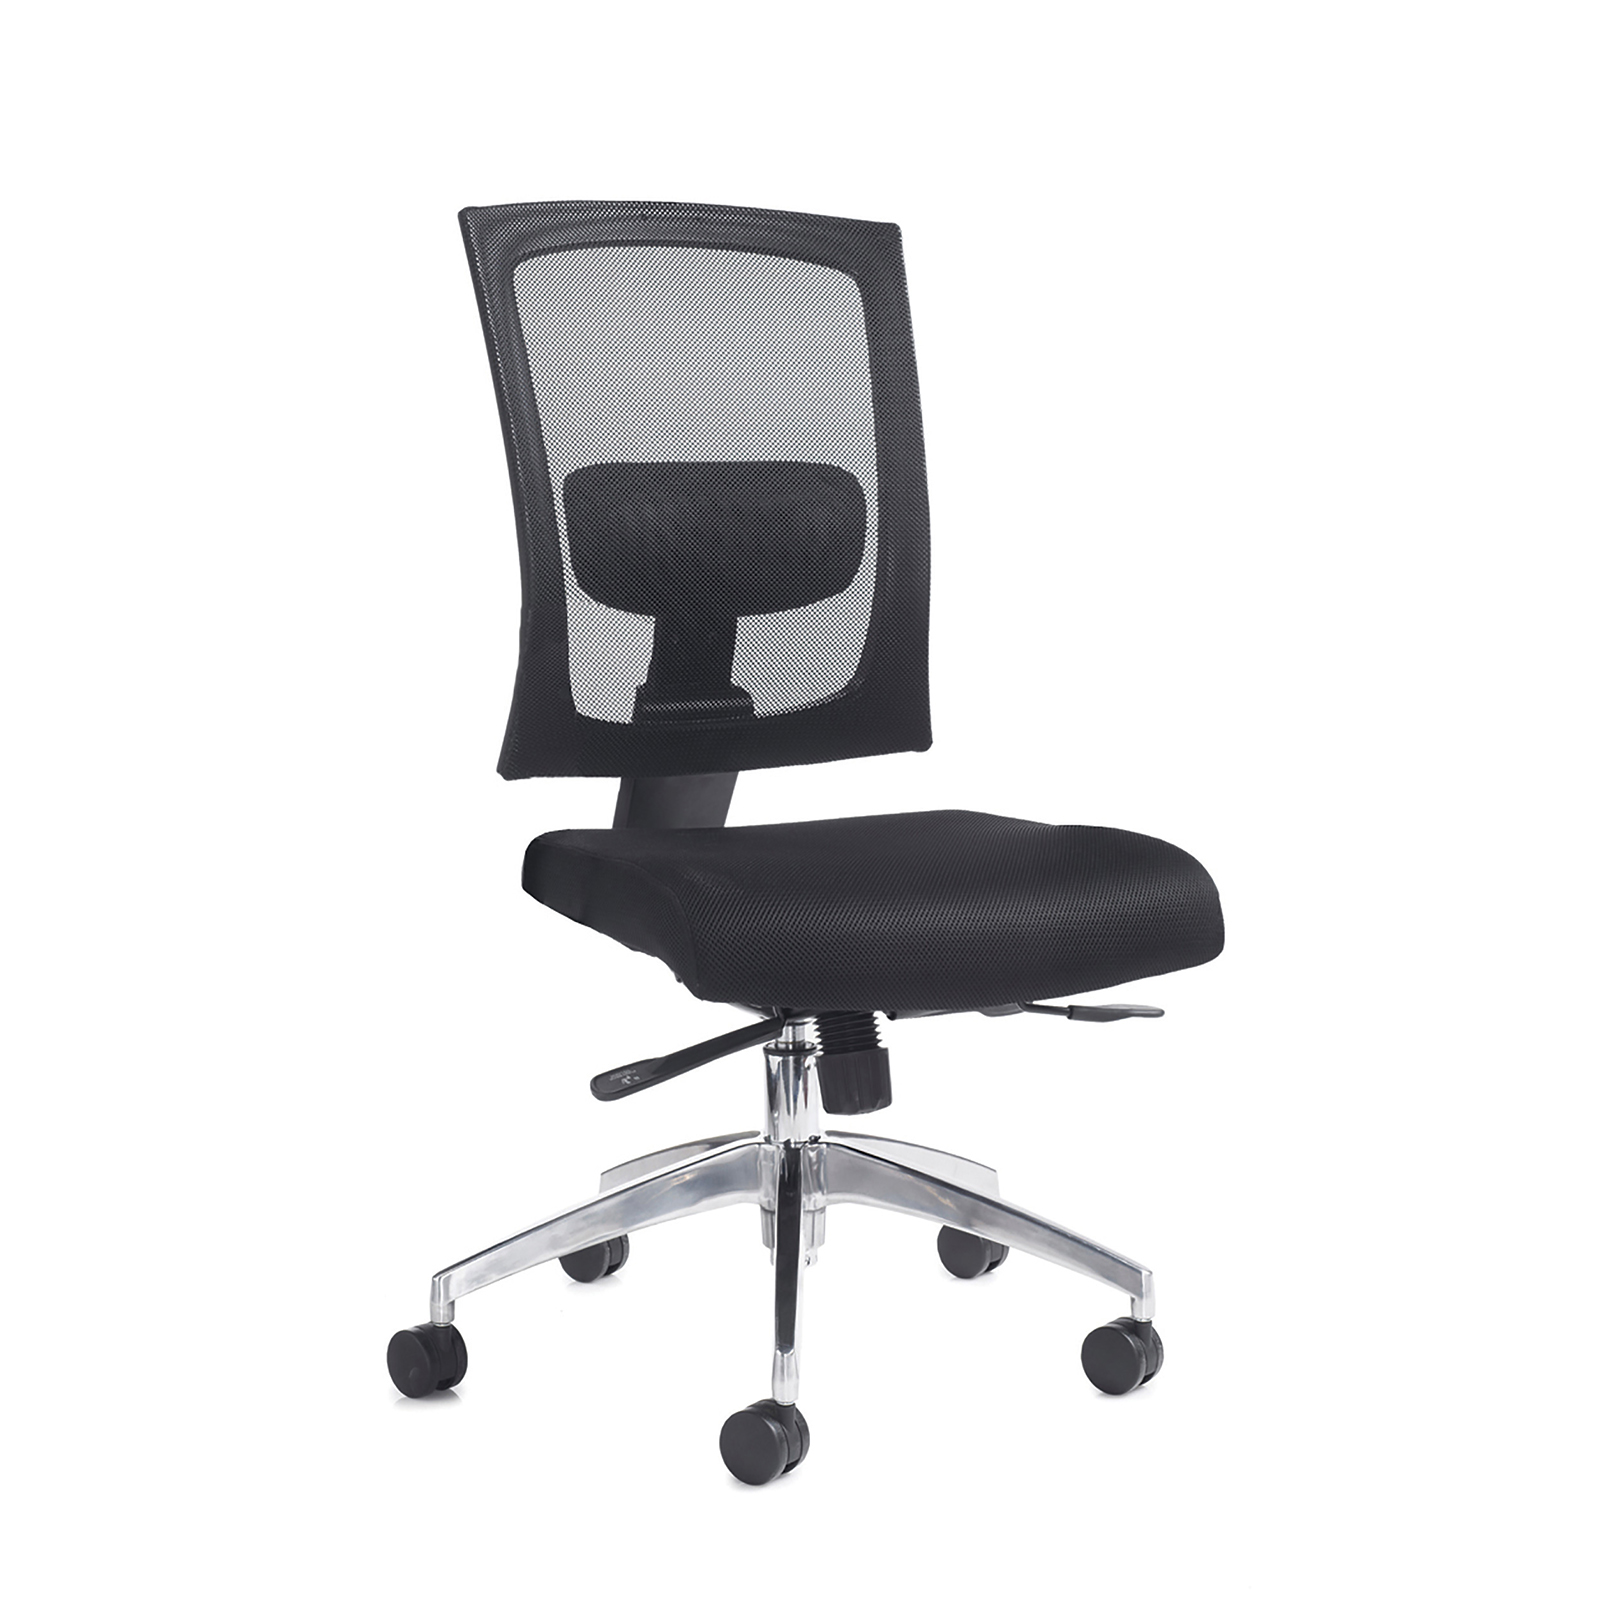 Gemini mesh task chair with no arms - black